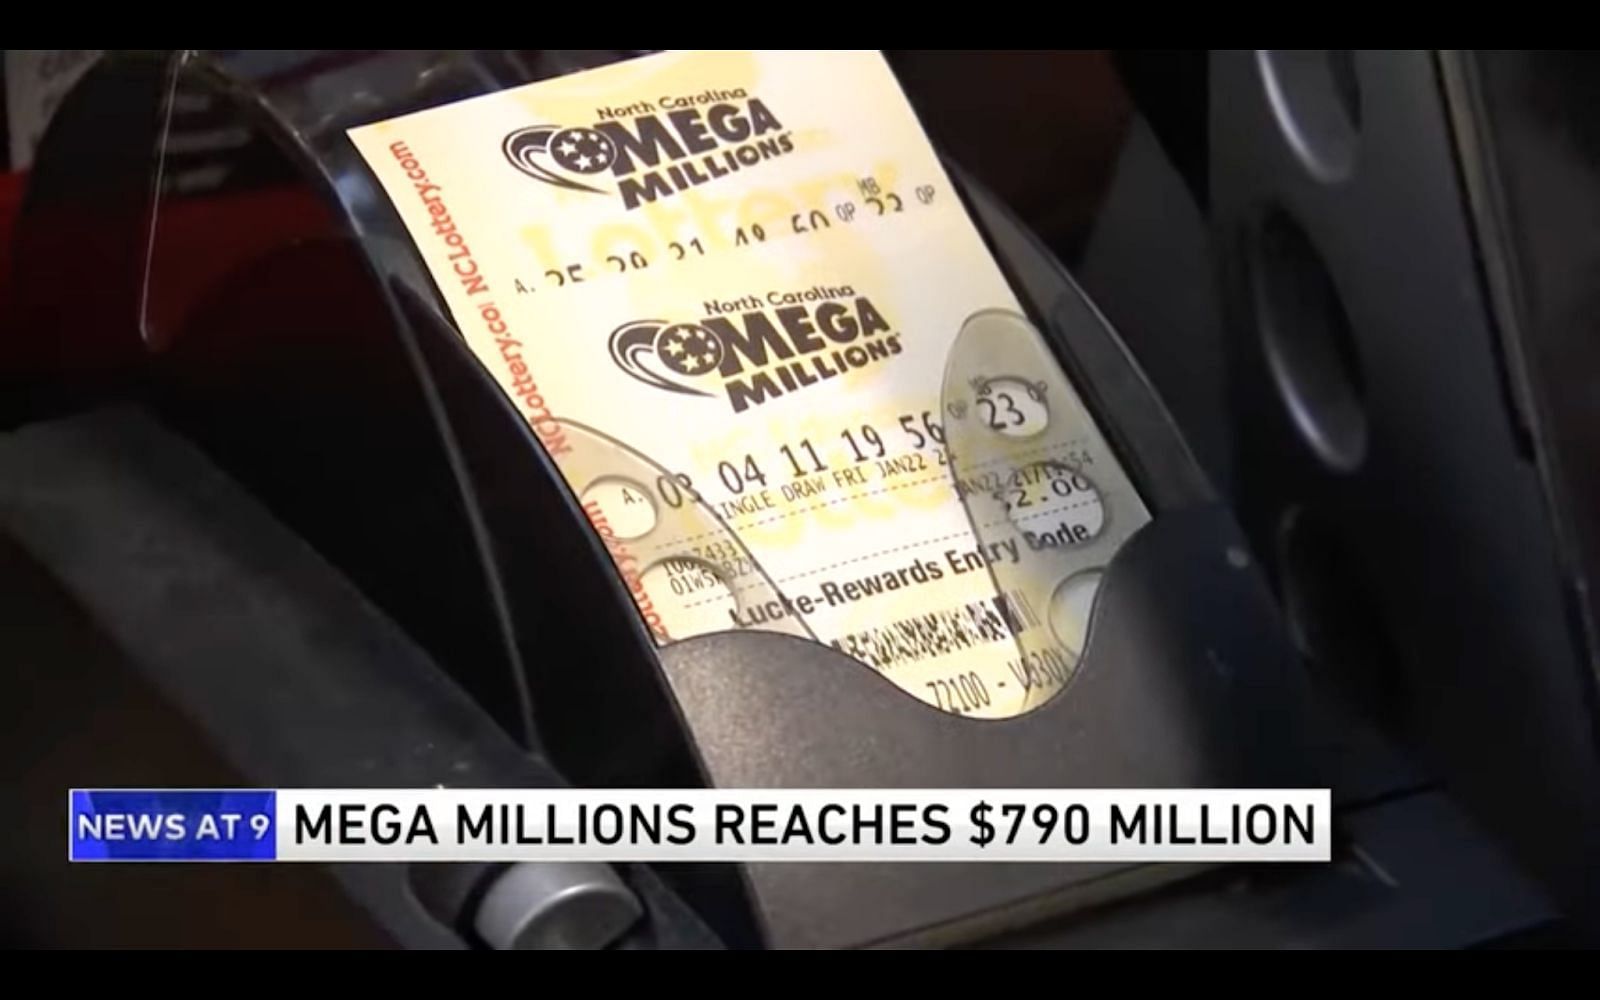 What channel is Mega Millions on?